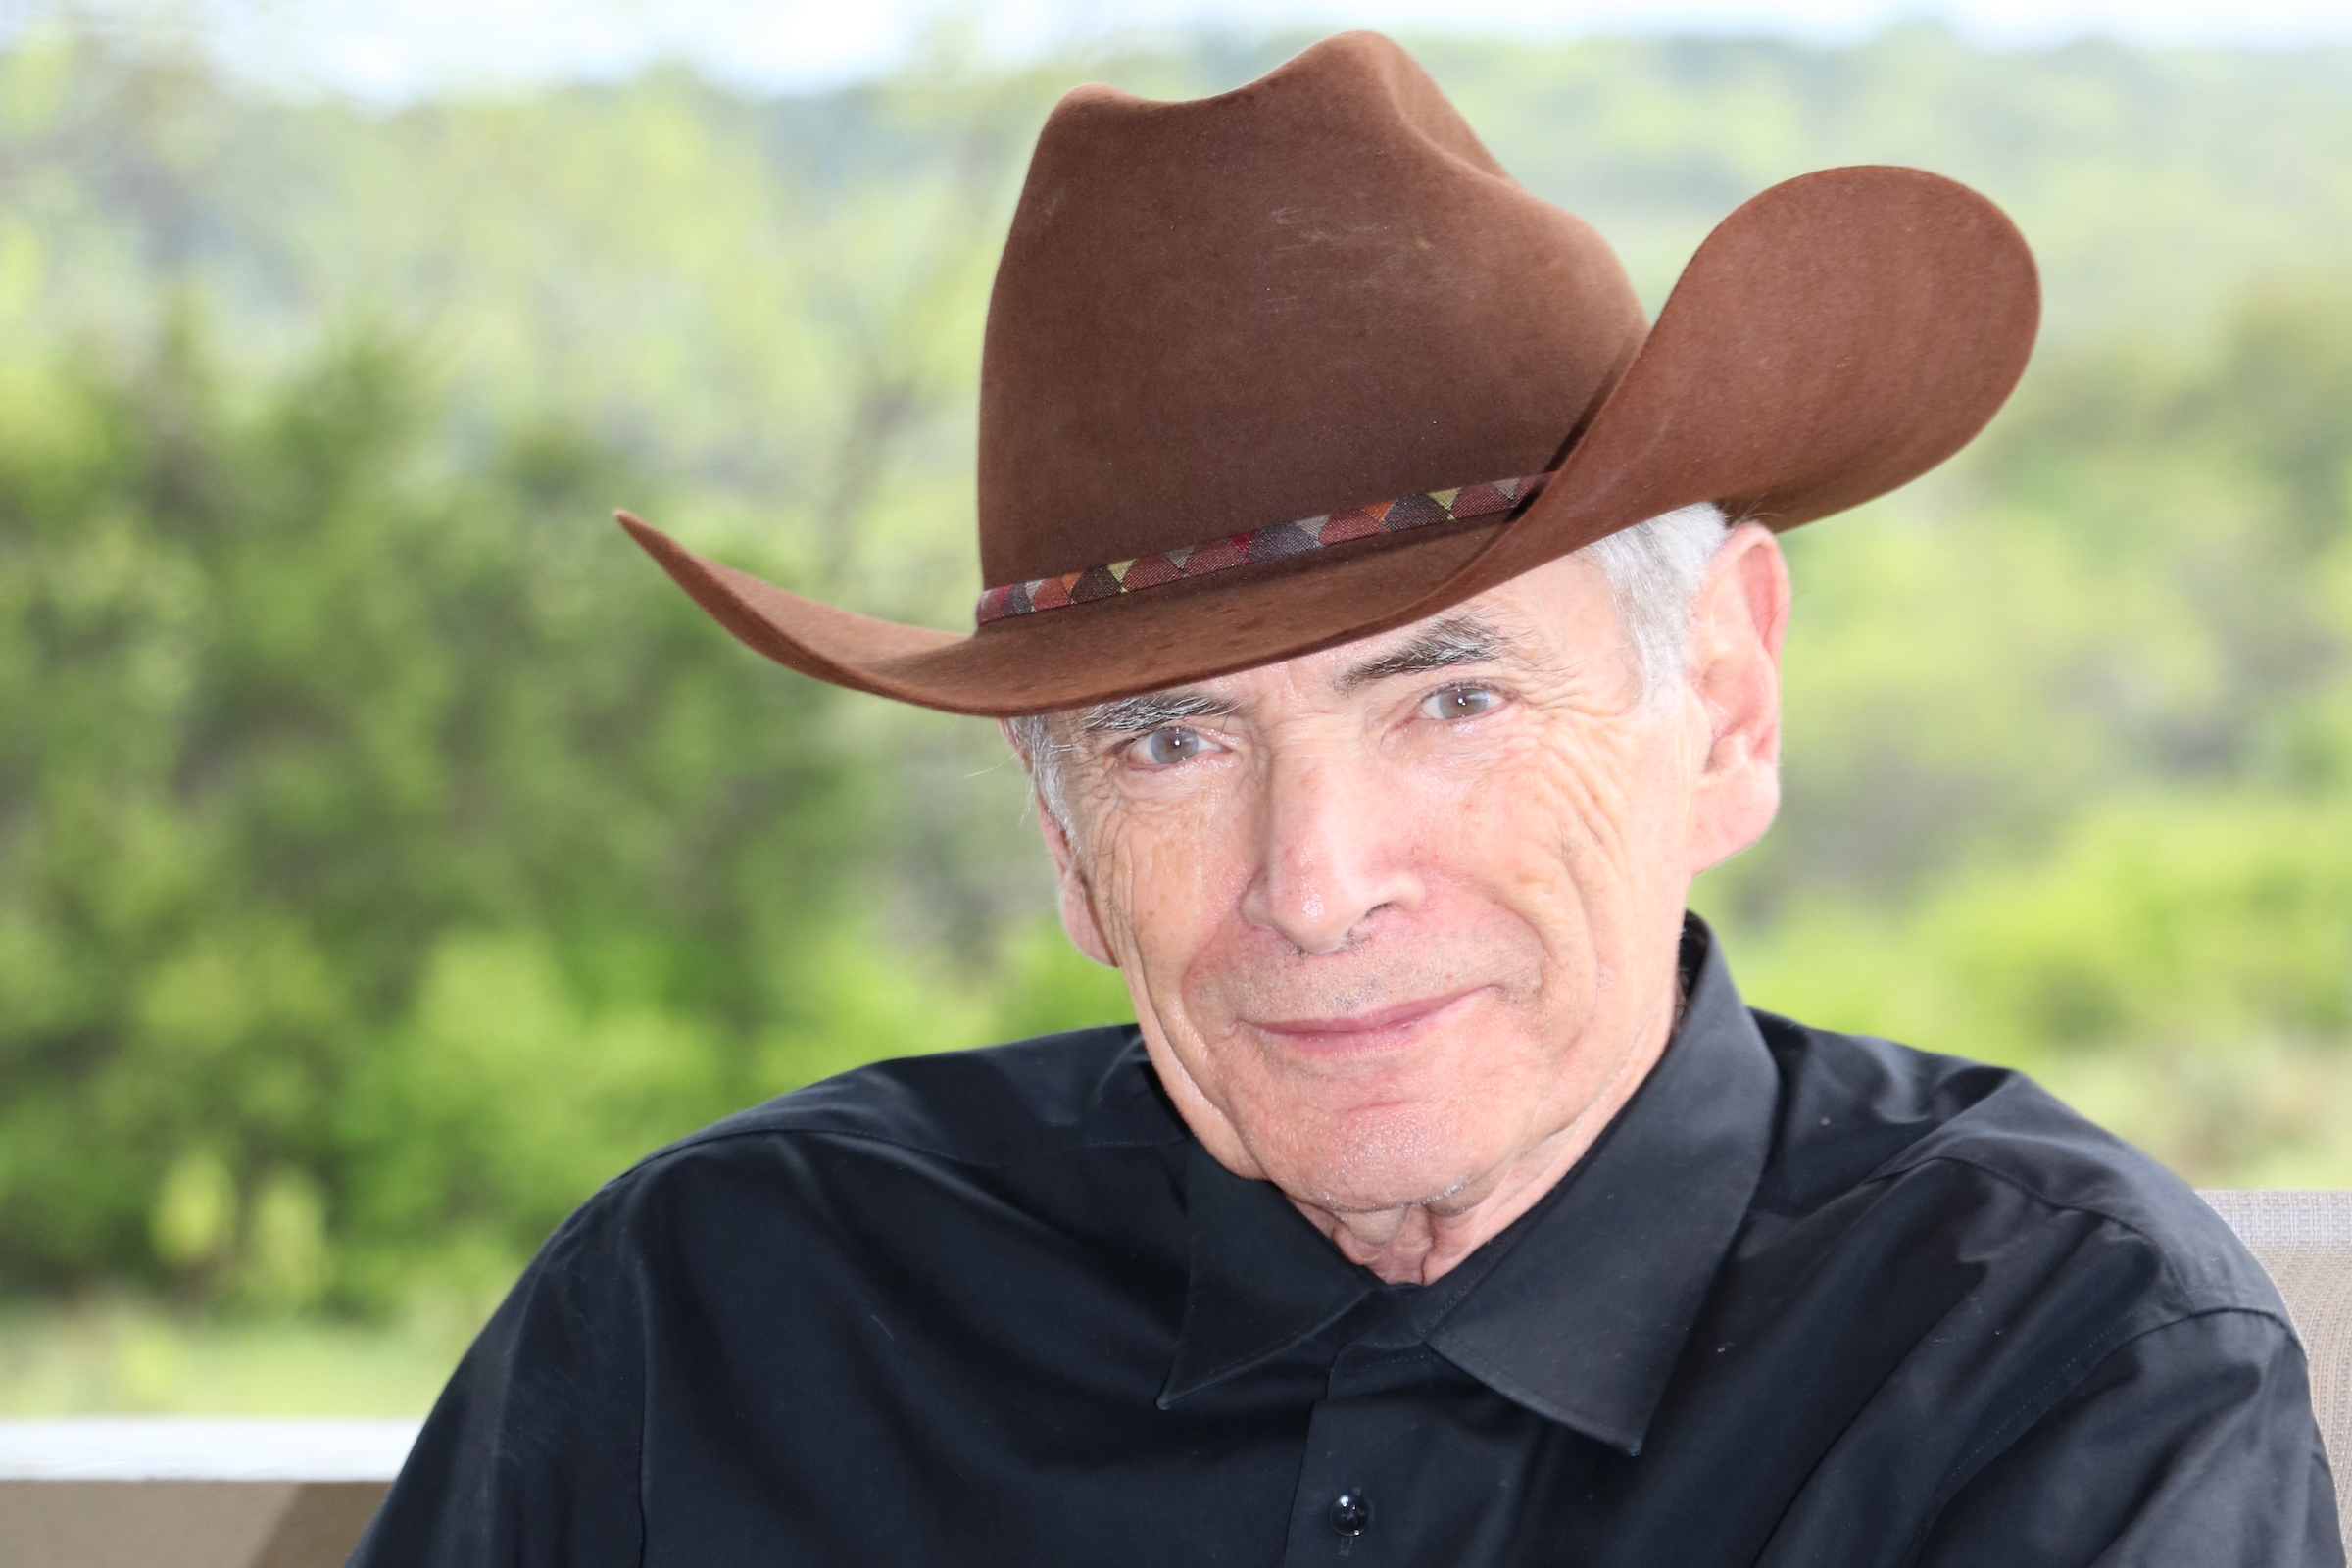 A man in a cowboy hat and collared black shirt smiles with trees and hills in the background